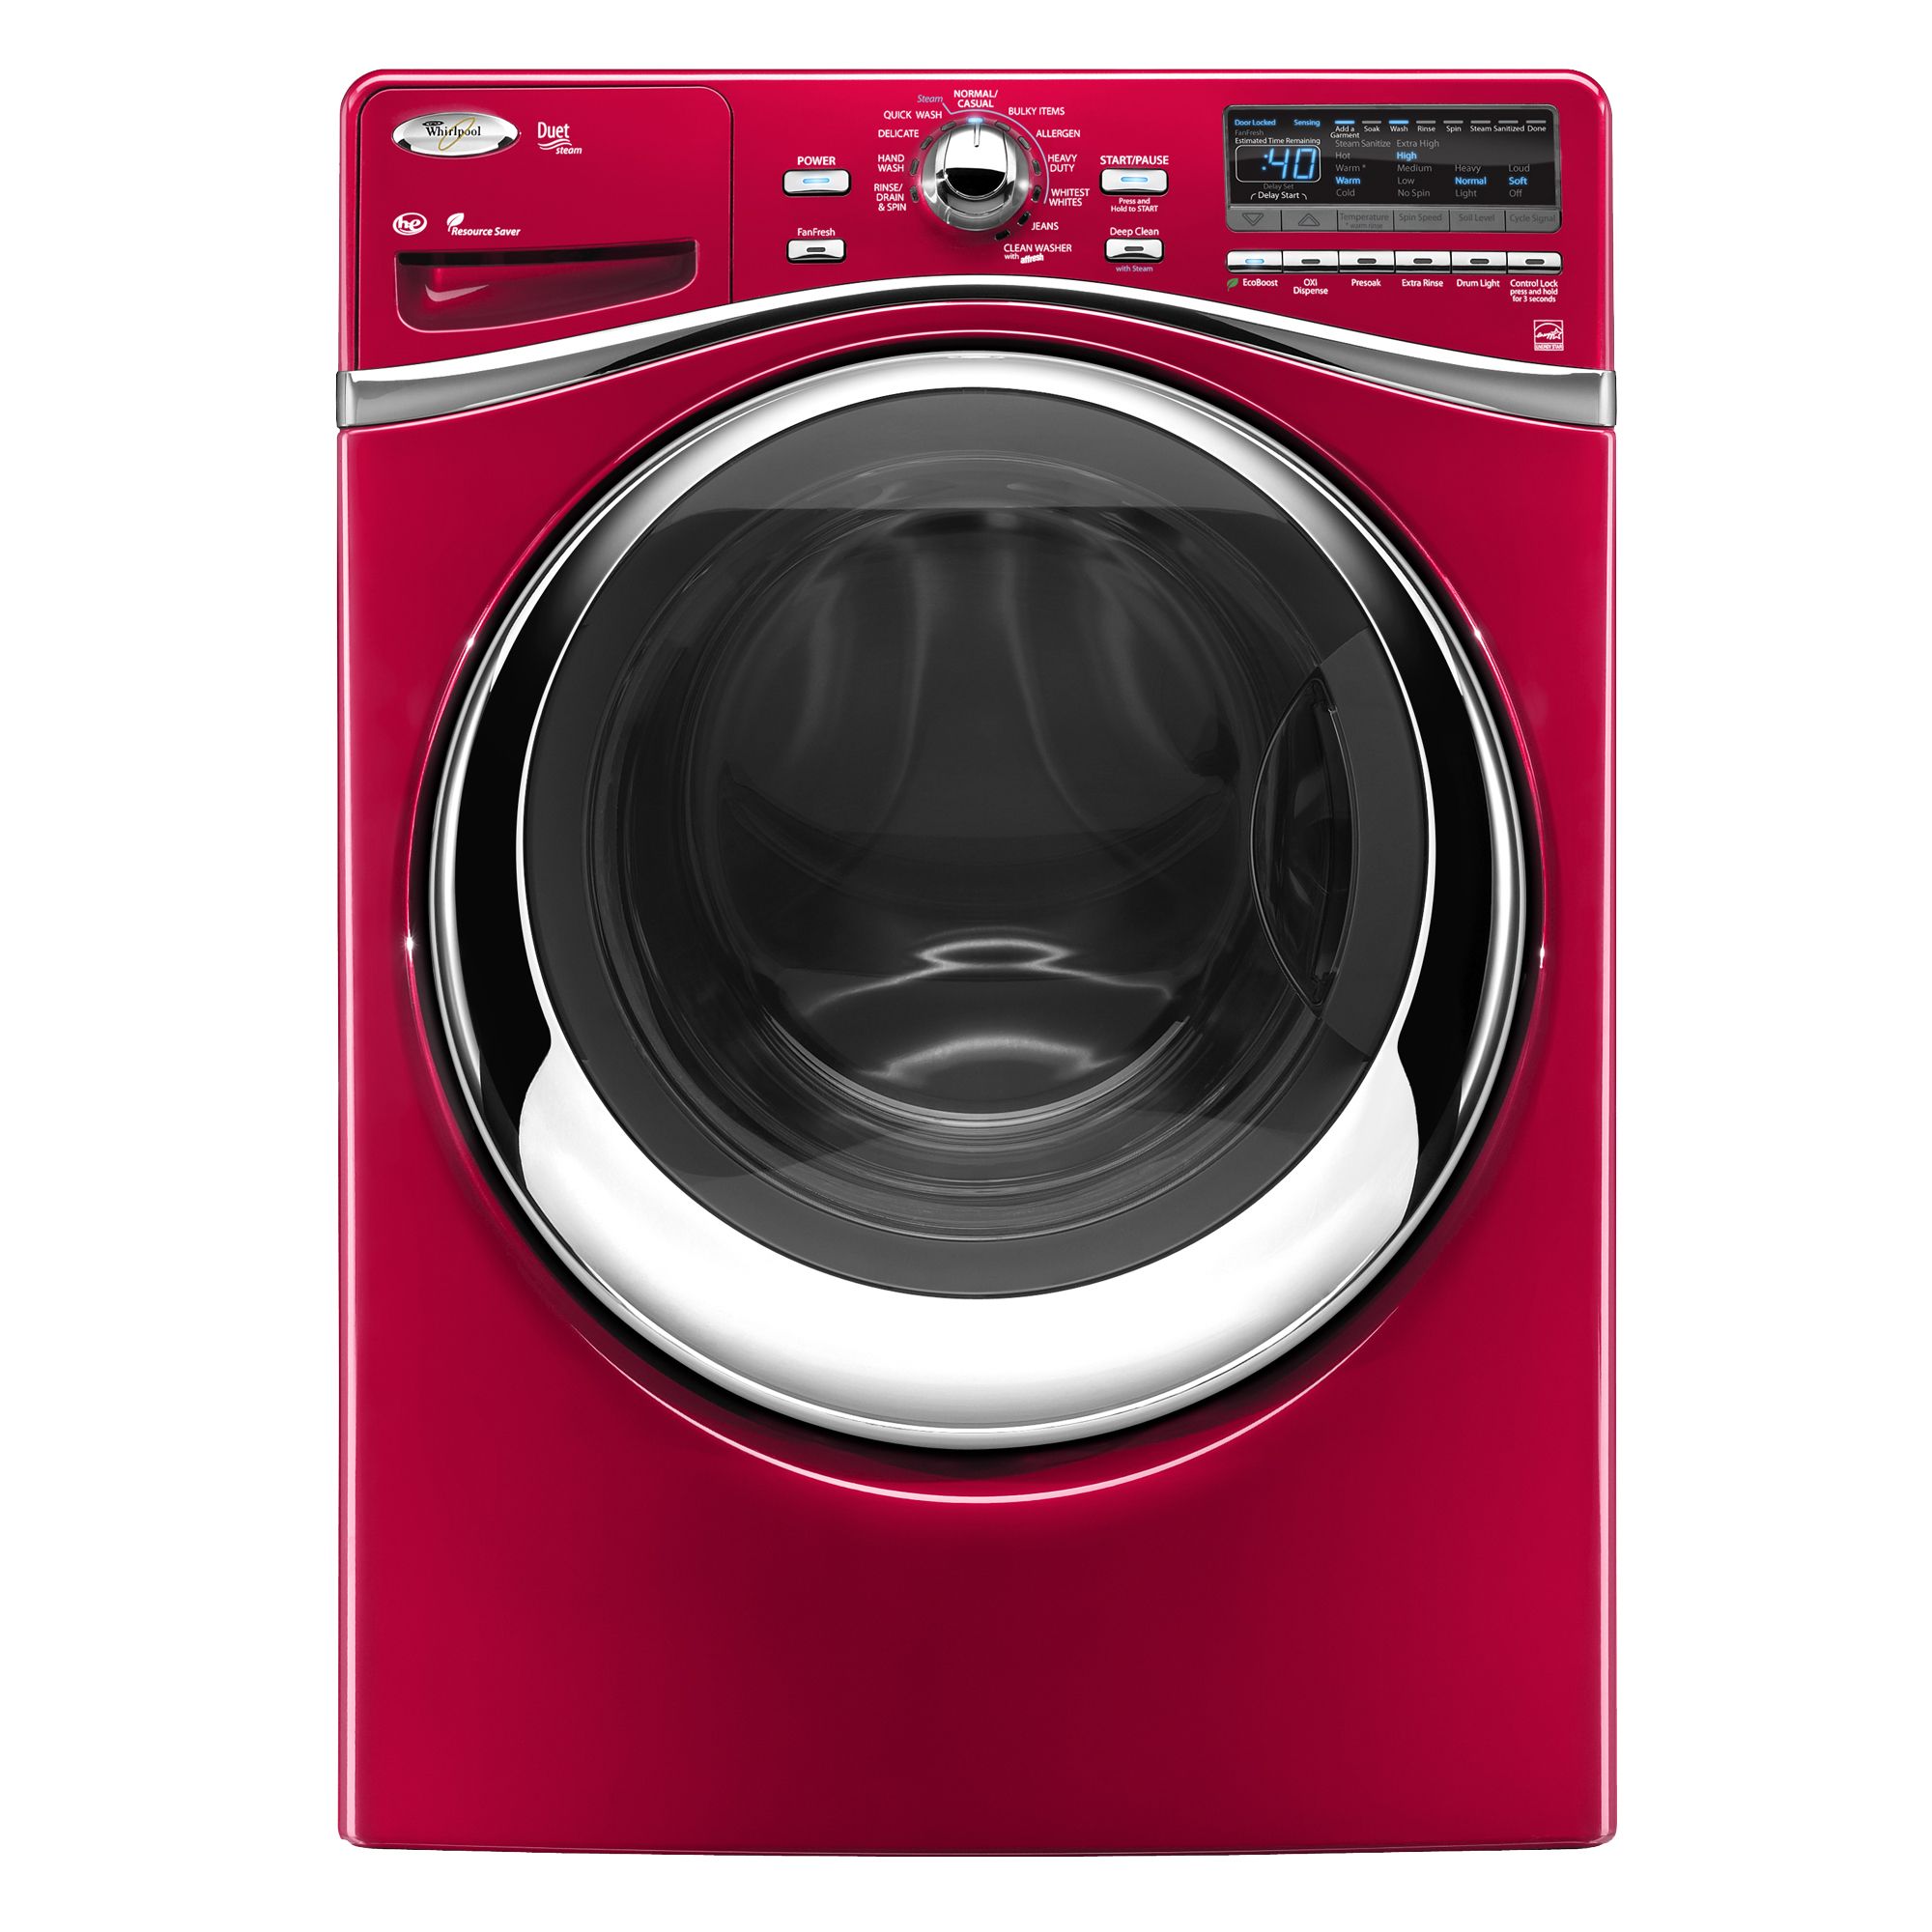 Whirlpool Duet Premium 4.3 cu. ft. Front Load Washer